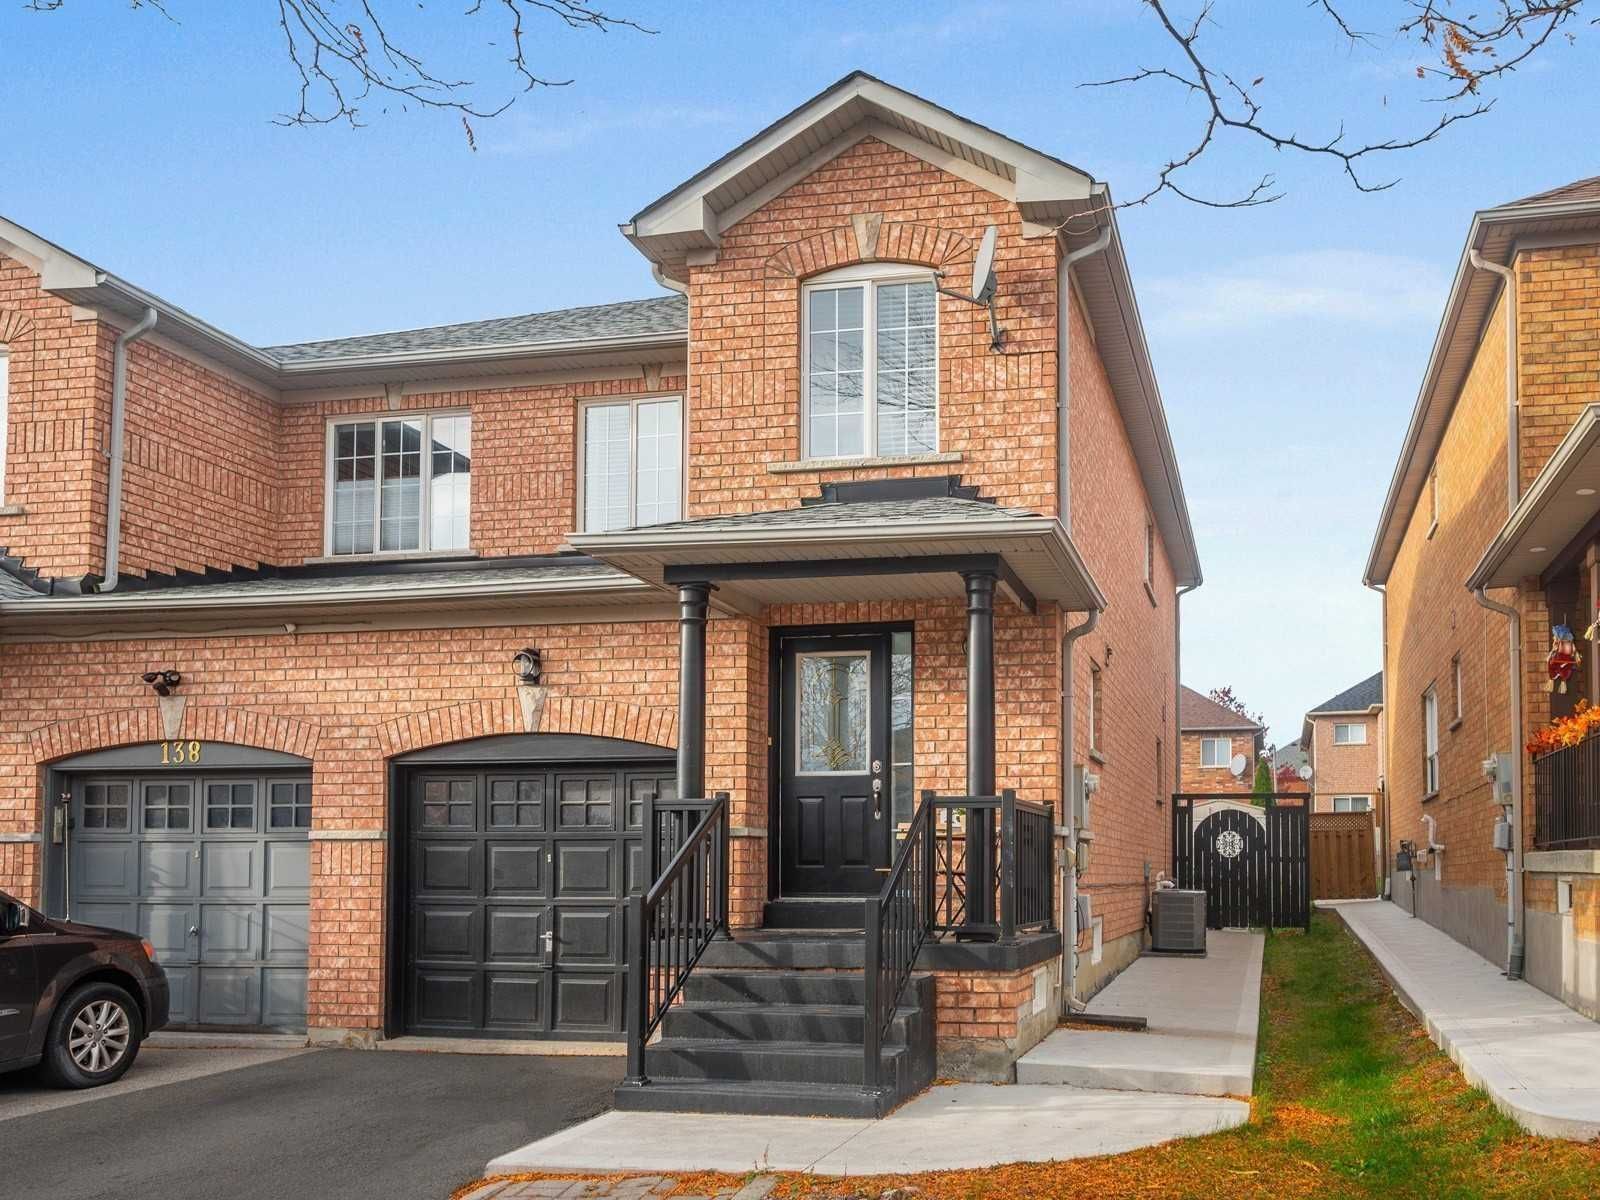 New property listed in Sonoma Heights, Vaughan